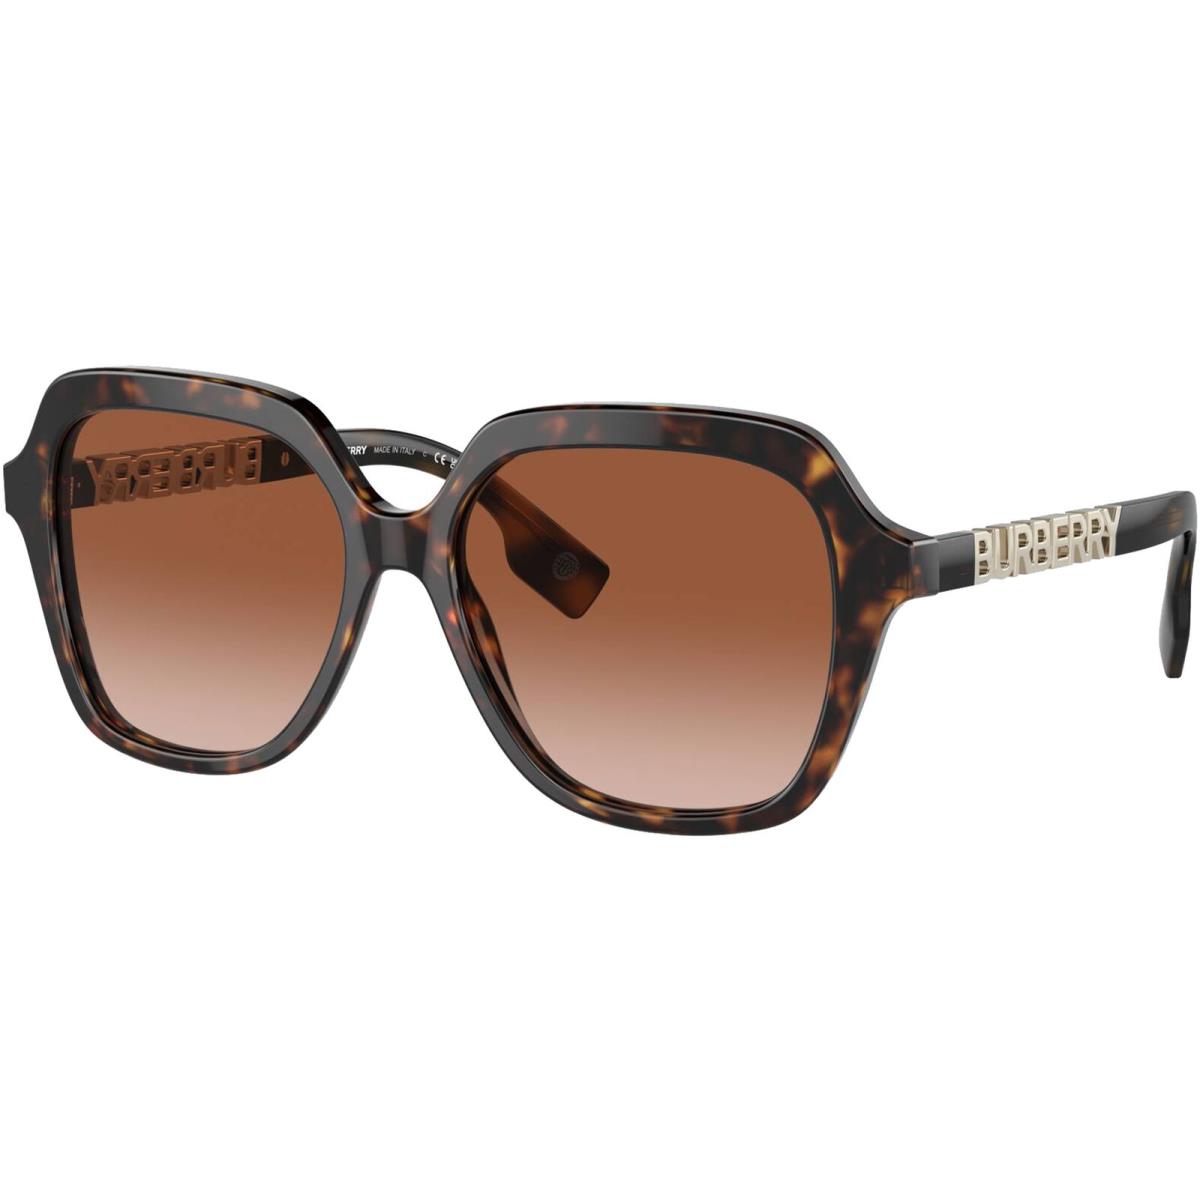 Burberry Joni Women`s Butterfly Sunglasses - BE4389 - Made in Italy - Dark Havana/Brown (300213-55), Frame: Select Variation